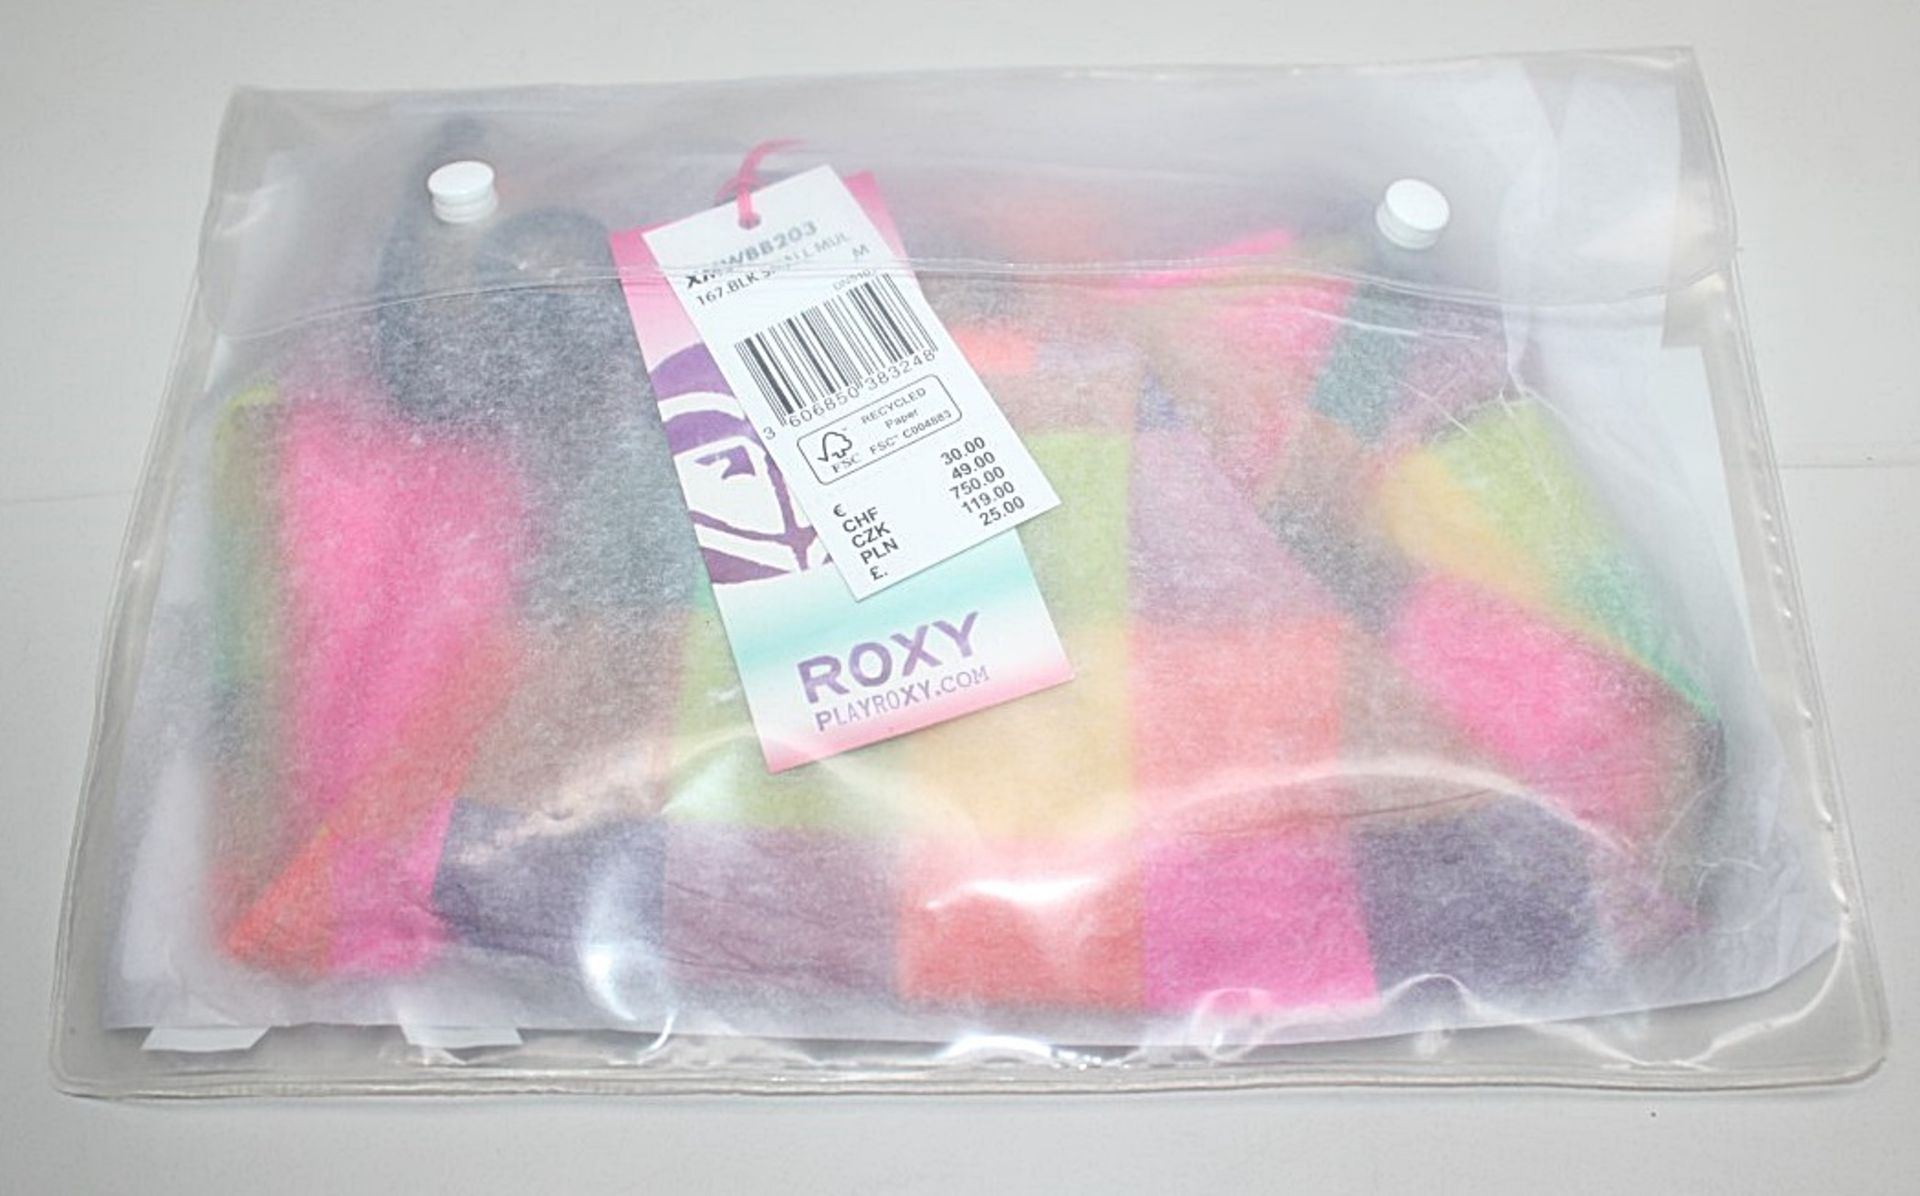 30 x Pairs Of ROXY Bikini Bottoms - Size: Small - All New, In Retail Pakaging - Resale Ready, With - Image 5 of 5